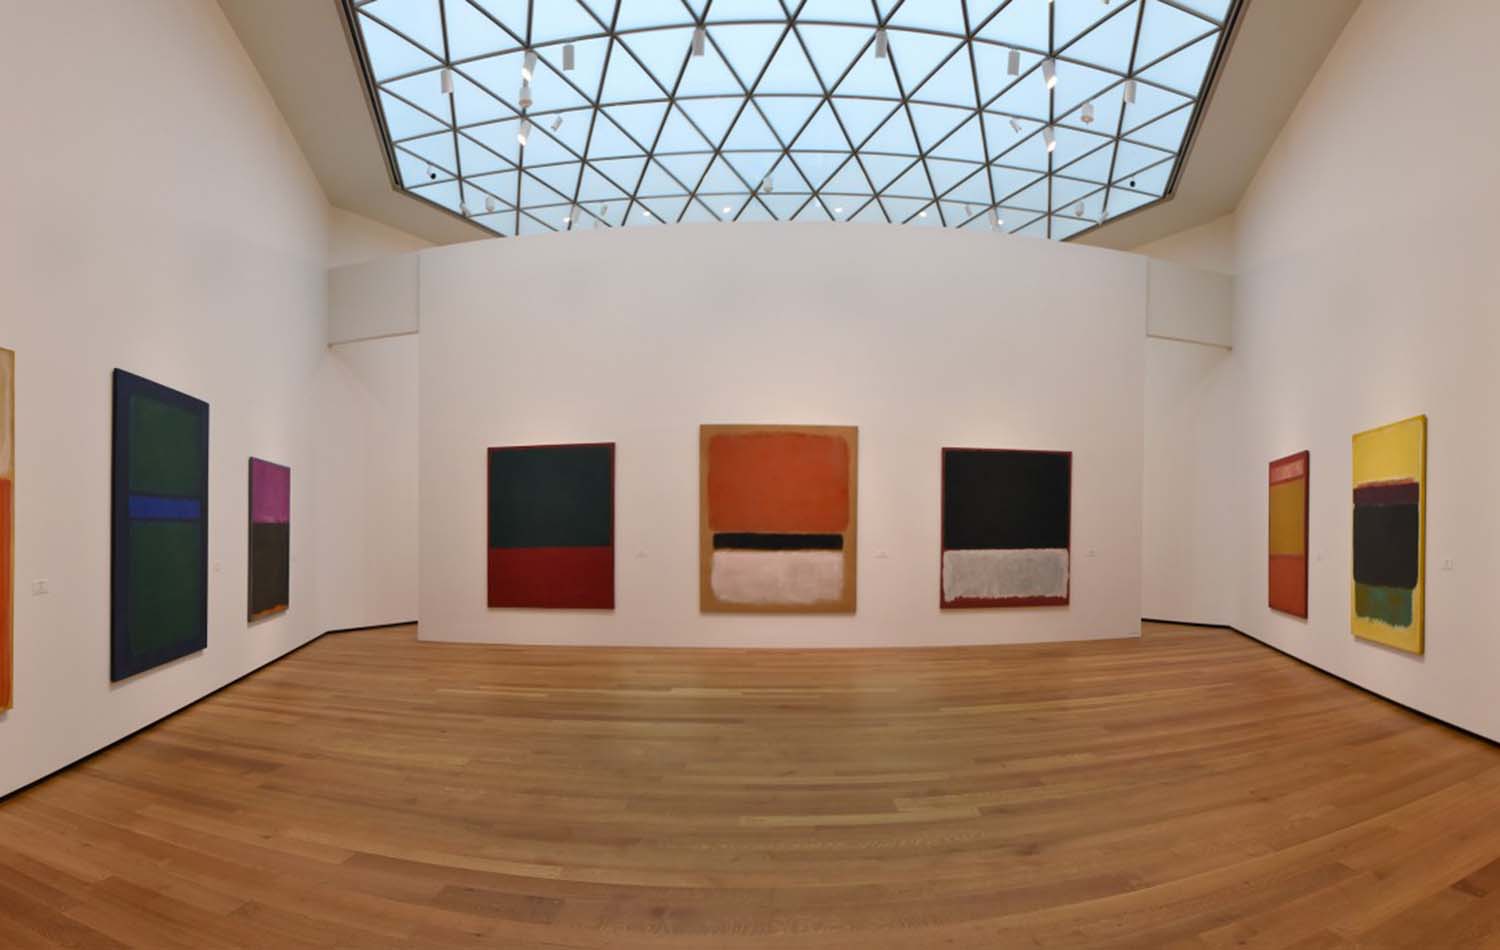  A collection of Mark Rothko works is located atop tower one. (Bill O'Leary/The Washington Post) 